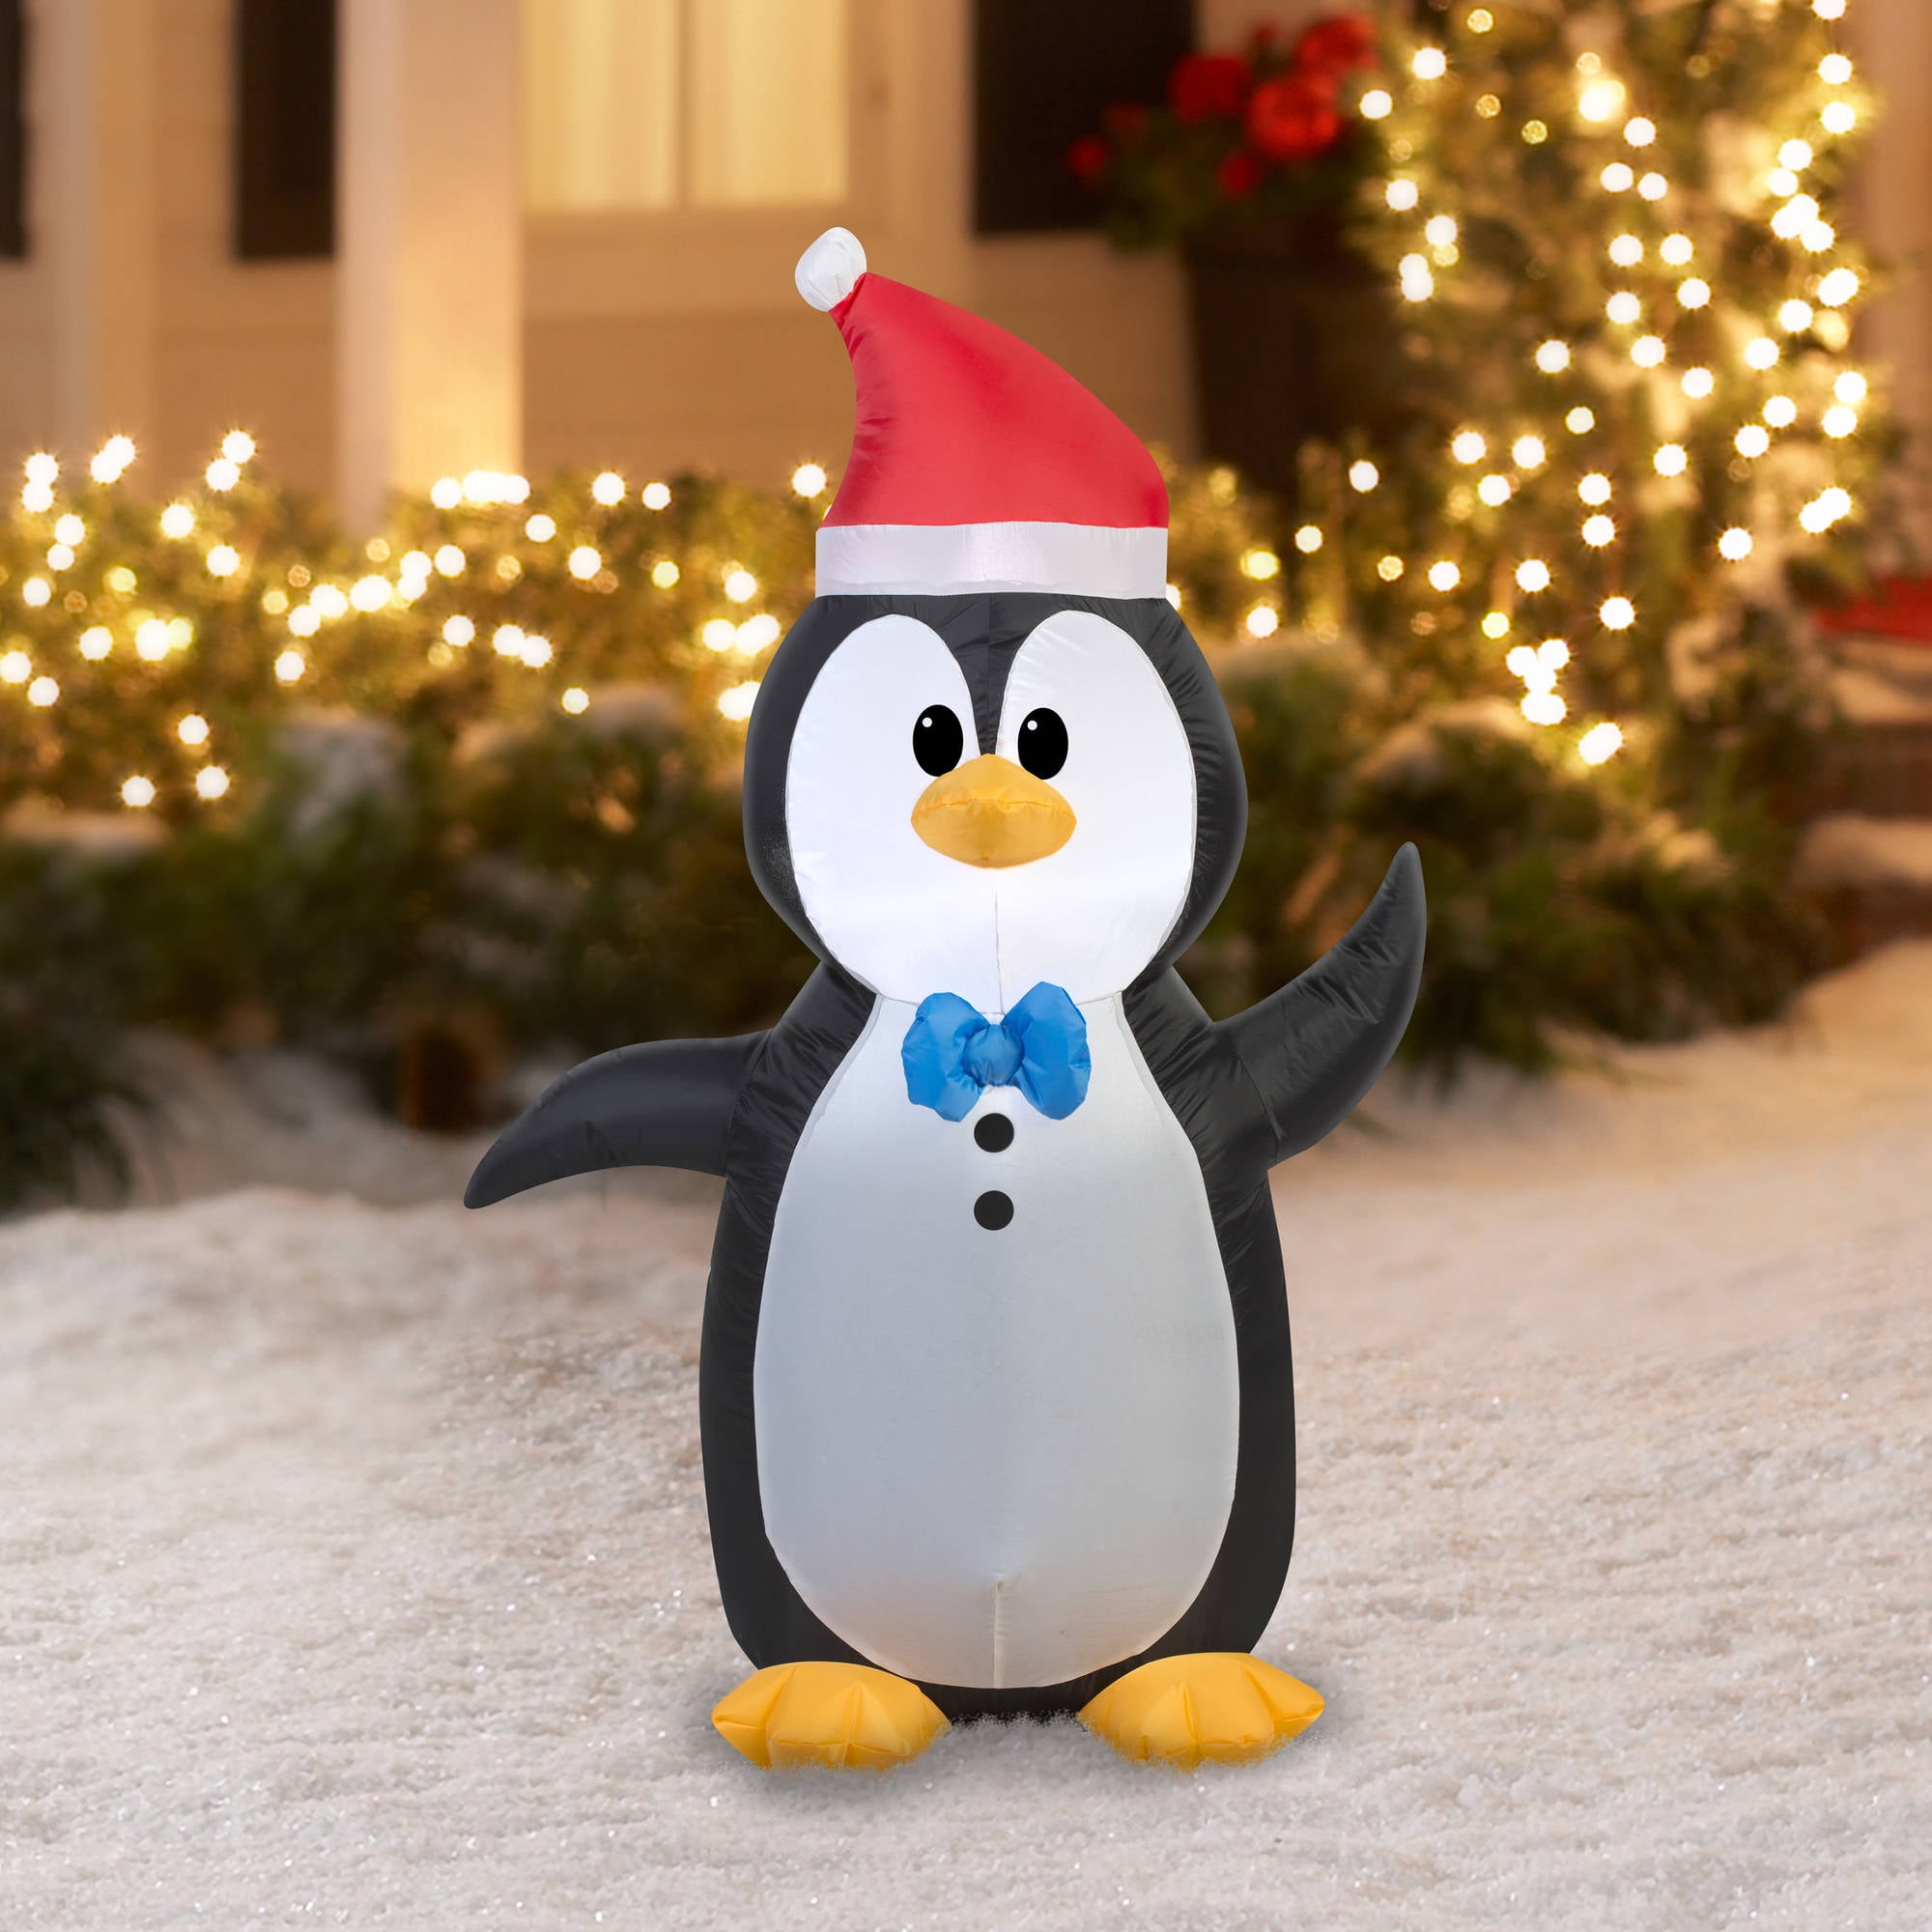 Indoor Outdoor Holiday Decor Gemmy Airblown Inflatable Penguins On Vacation Having Fun On A Slide 7.5-foot Wide x 6-foot Tall